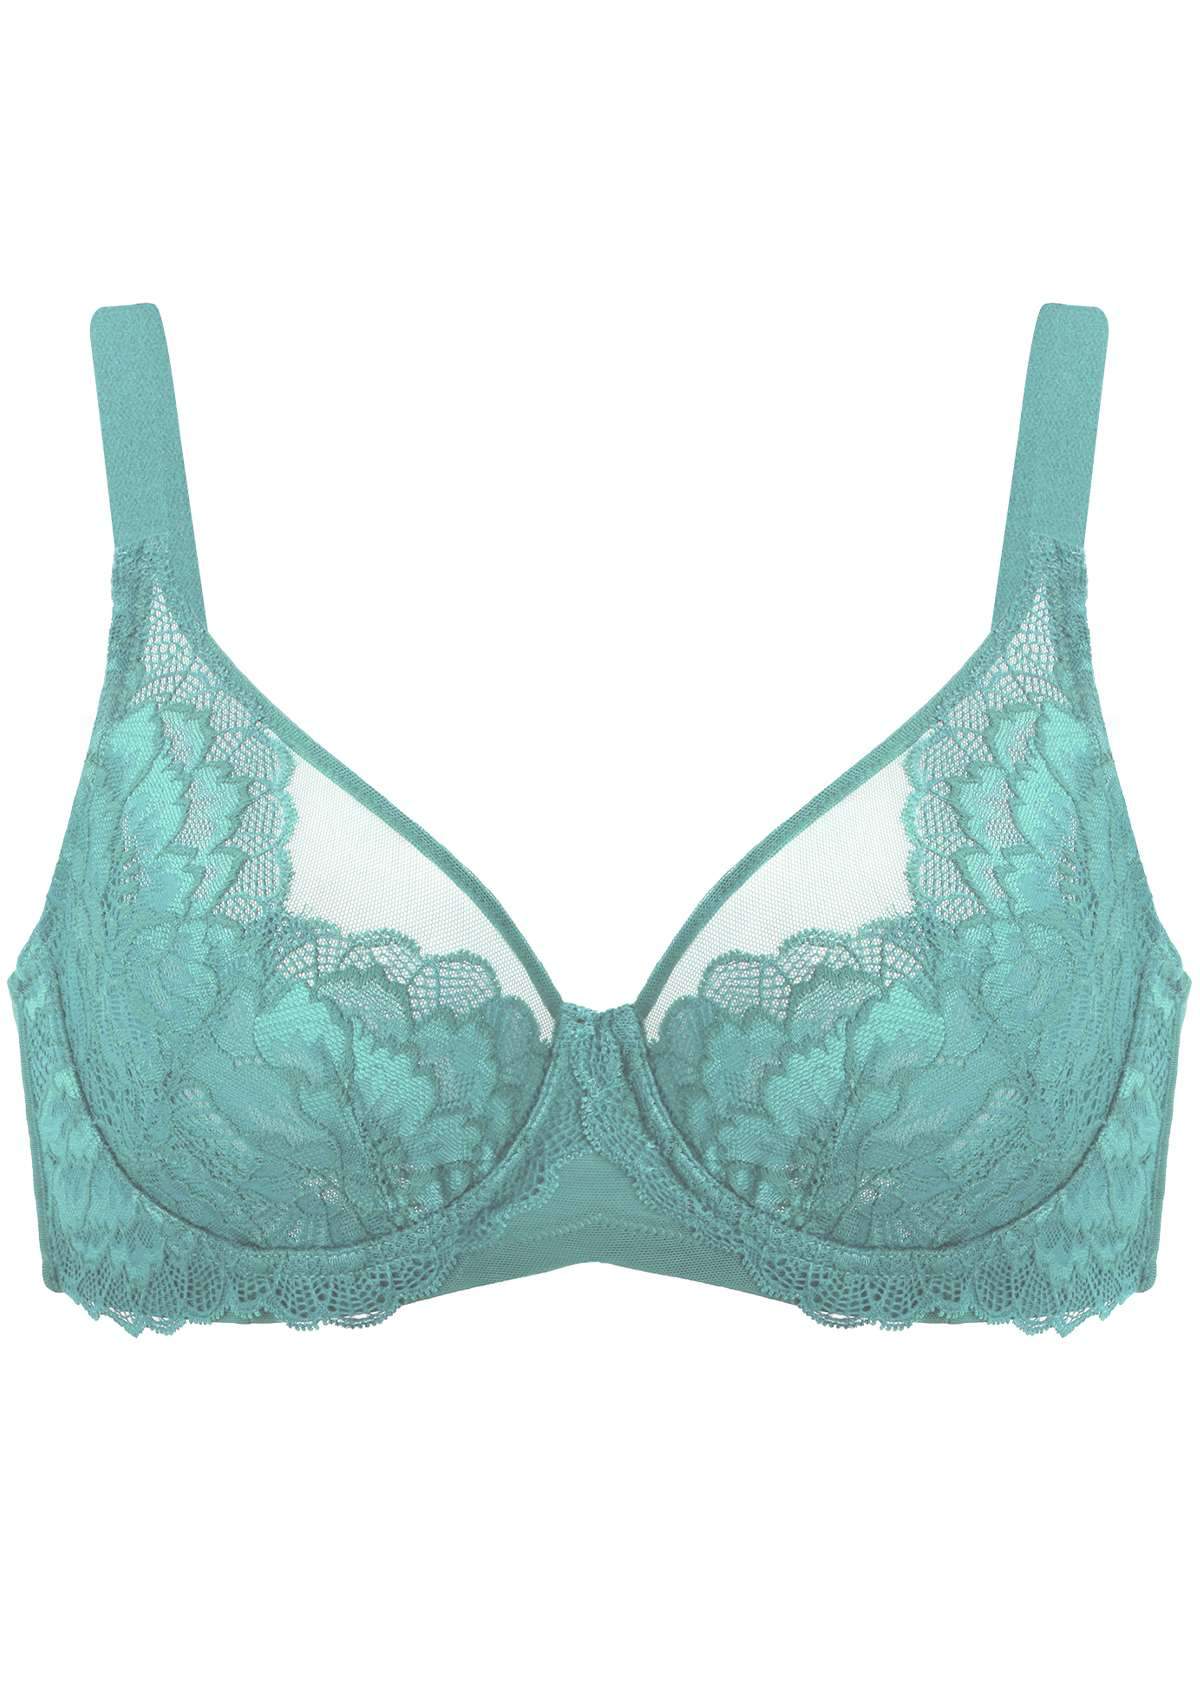 HSIA Paeonia Lace Full Coverage Underwire Non-Padded Uplifting Bra - Teal / 42 / C